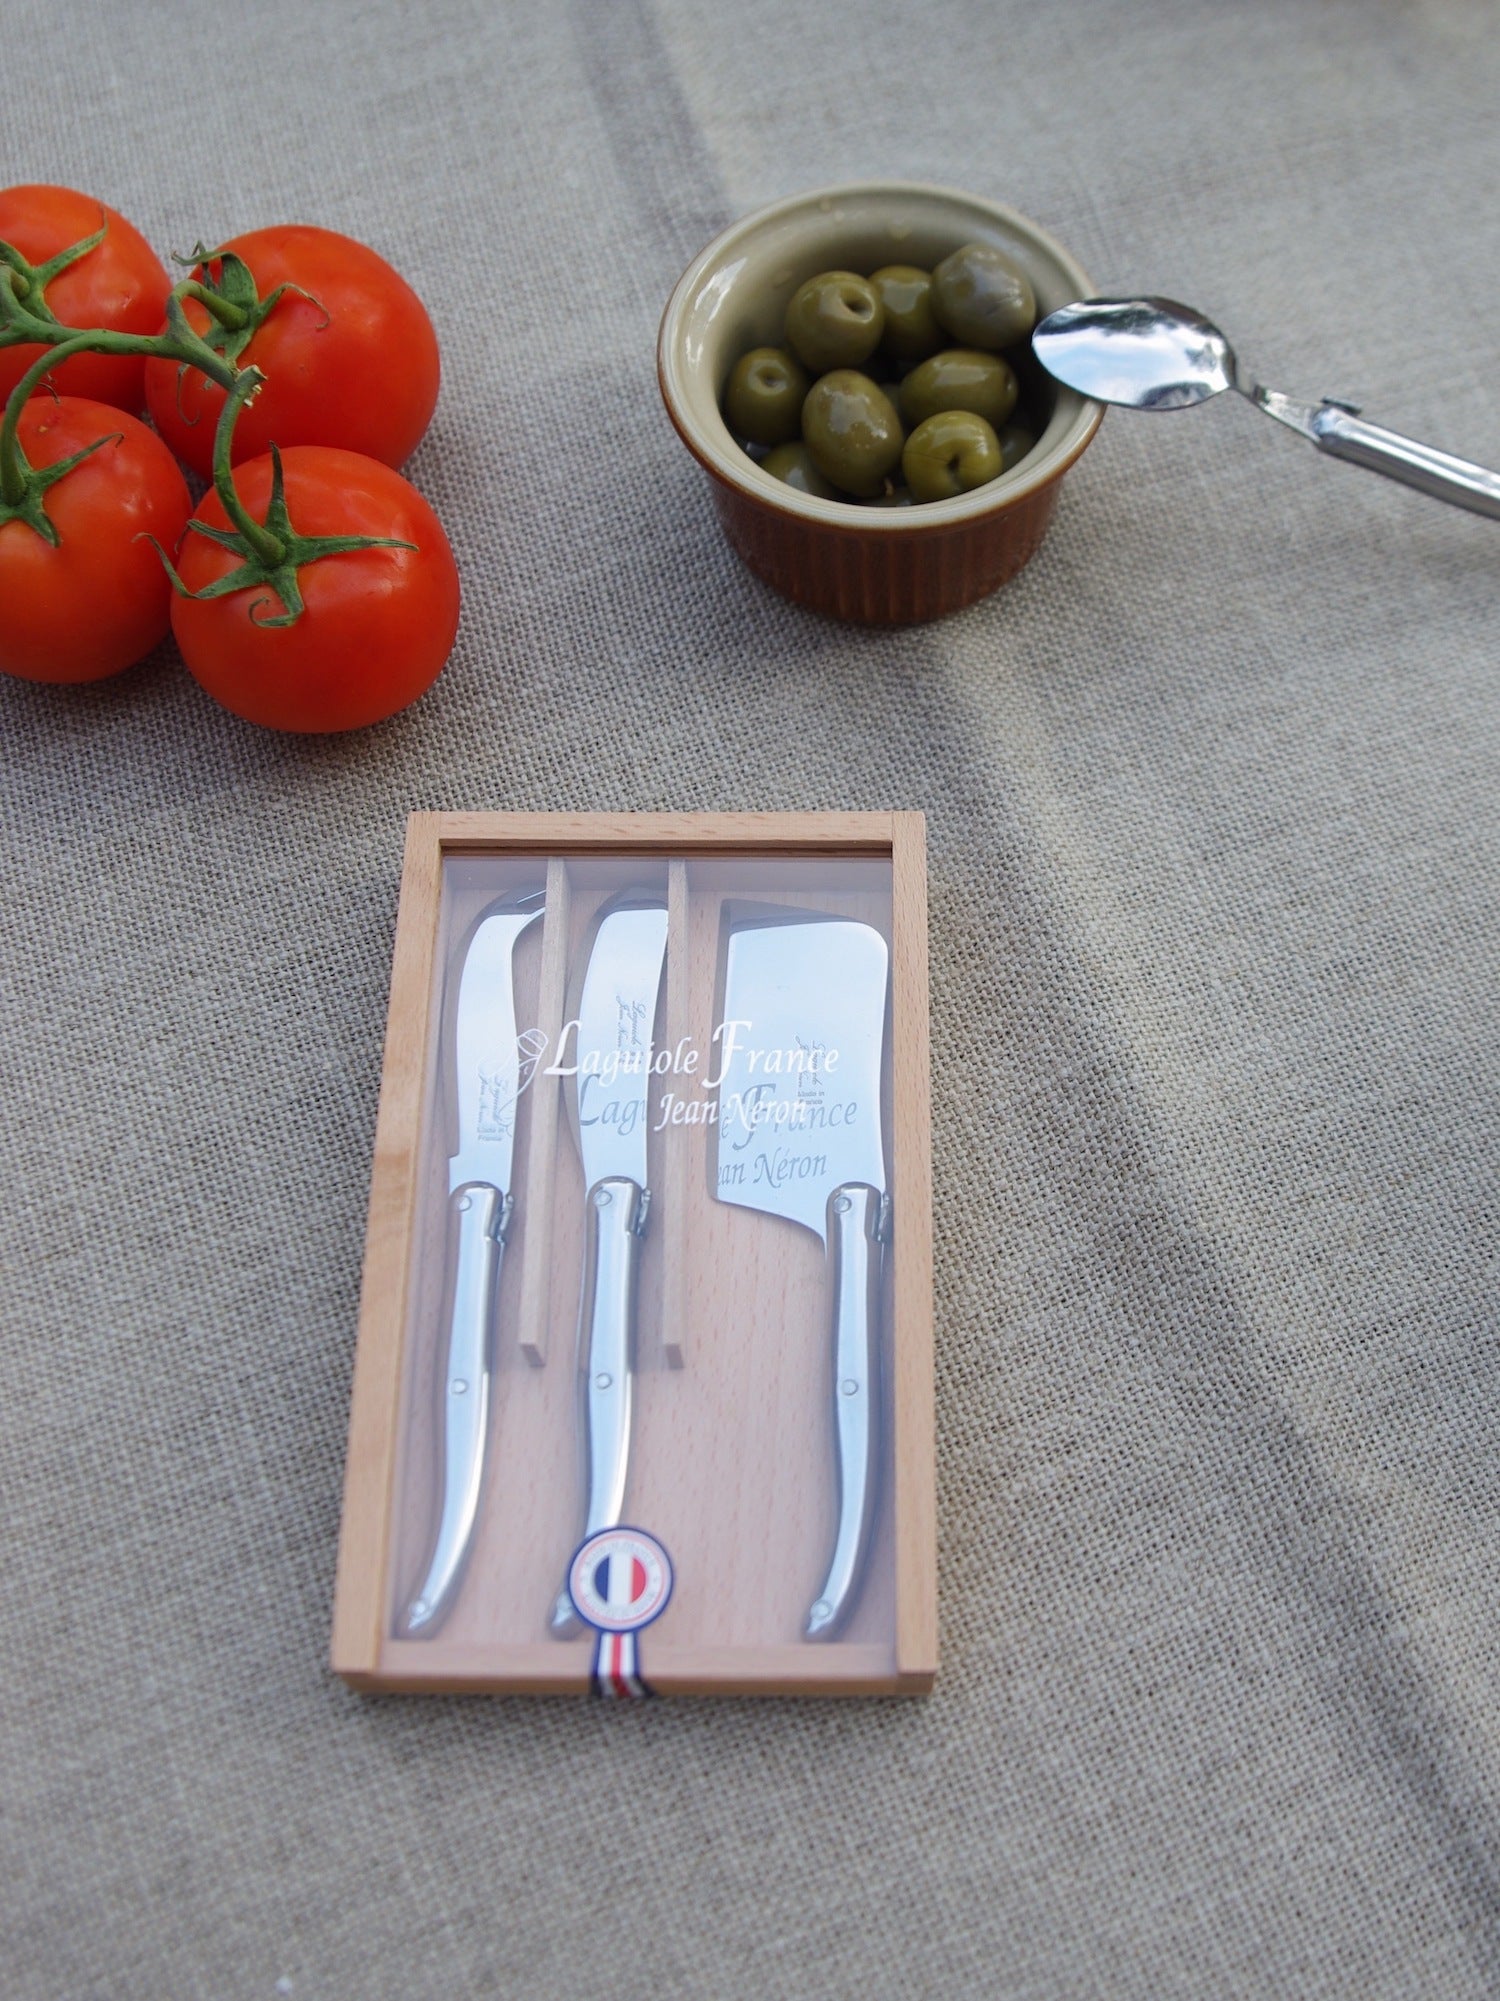 Laguiole Mini Stainless Steel Cheese Set in Wooden Box with Acrylic Lid (Set of 3) Cutlery Set Laguiole Brand_Laguiole Cheese Sets Gift Sets Kitchen_Dinnerware Kitchen_Kitchenware Laguiole Loose Mini Rainbow Utensils Mini Cheese Sets Laguiole_Stainless_Steel_Cheese_Set-A498CFCA-1500x2001